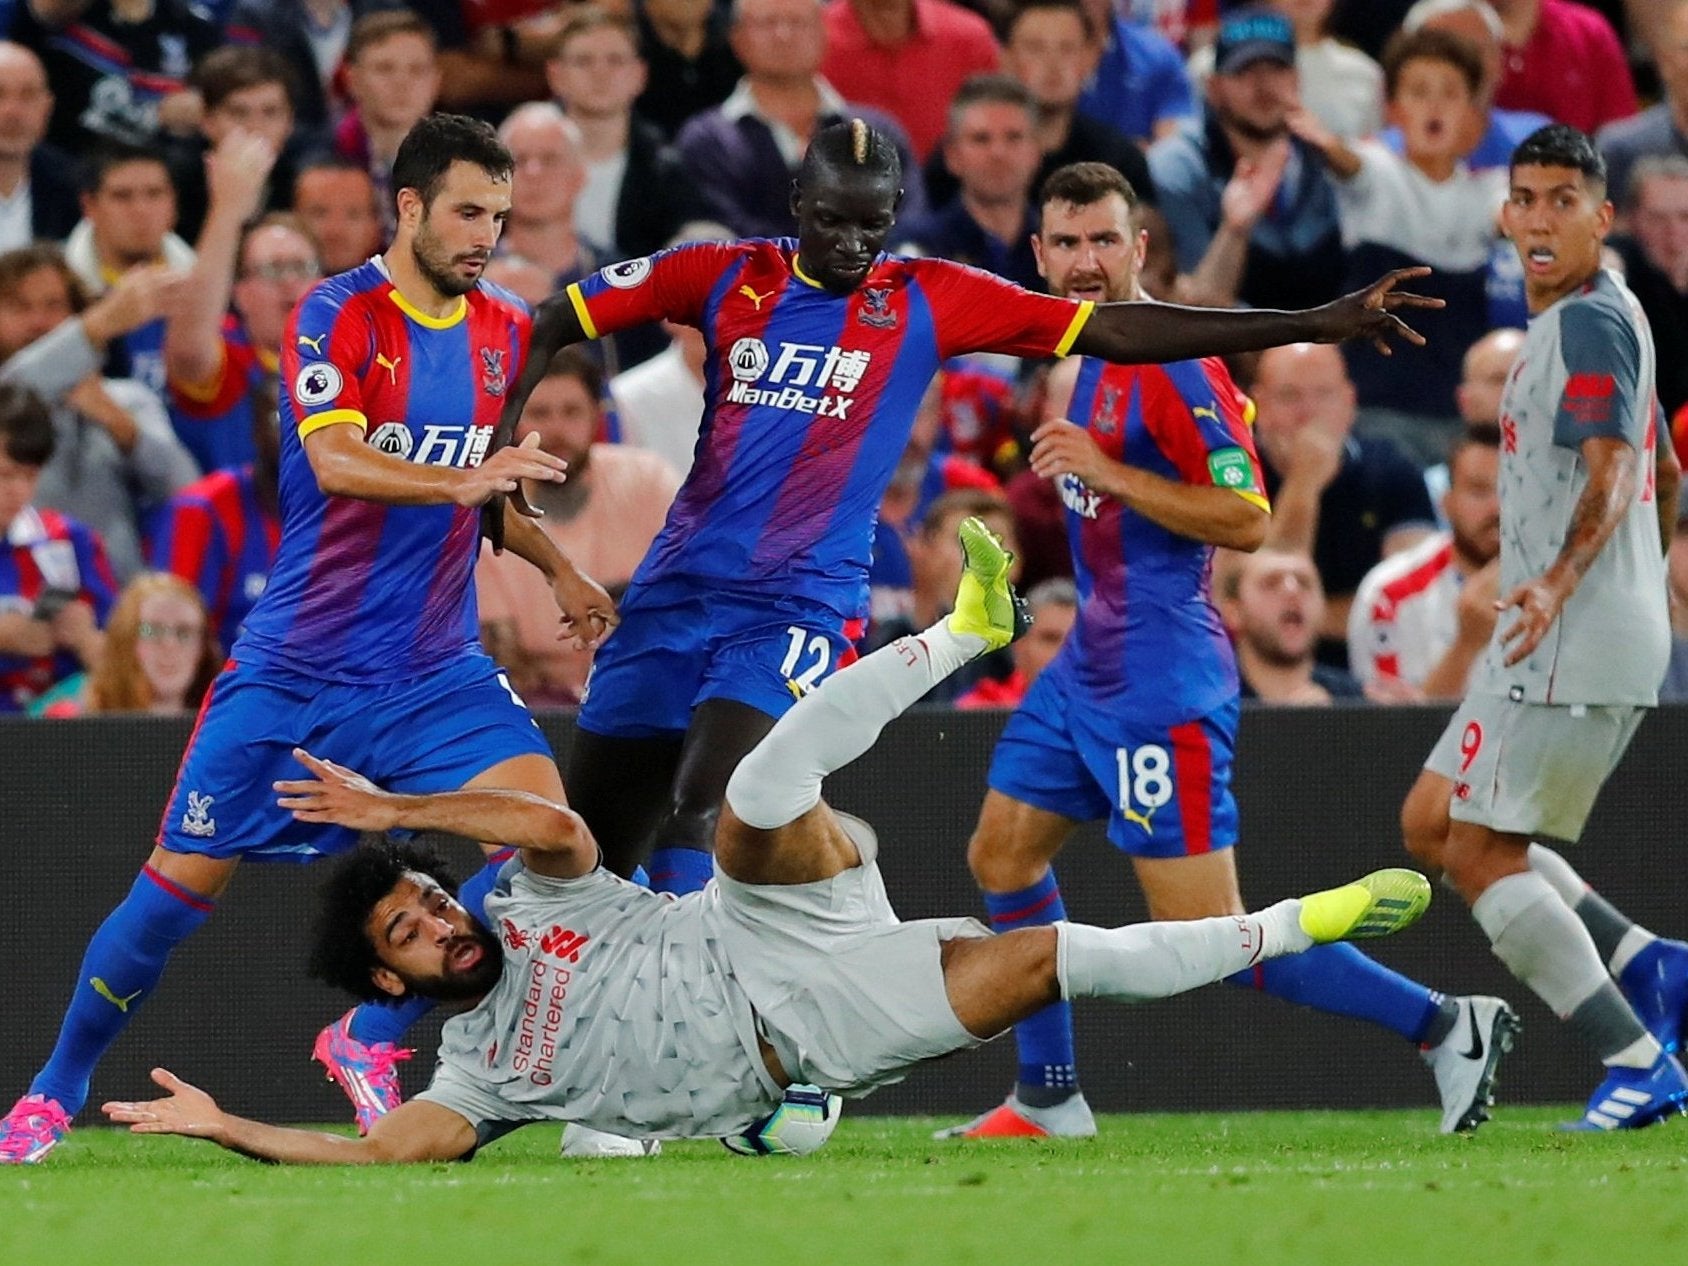 Crystal Palace vs Liverpool: Gary Neville puts Mohamed Salah penalty down to 'theatrical fall'